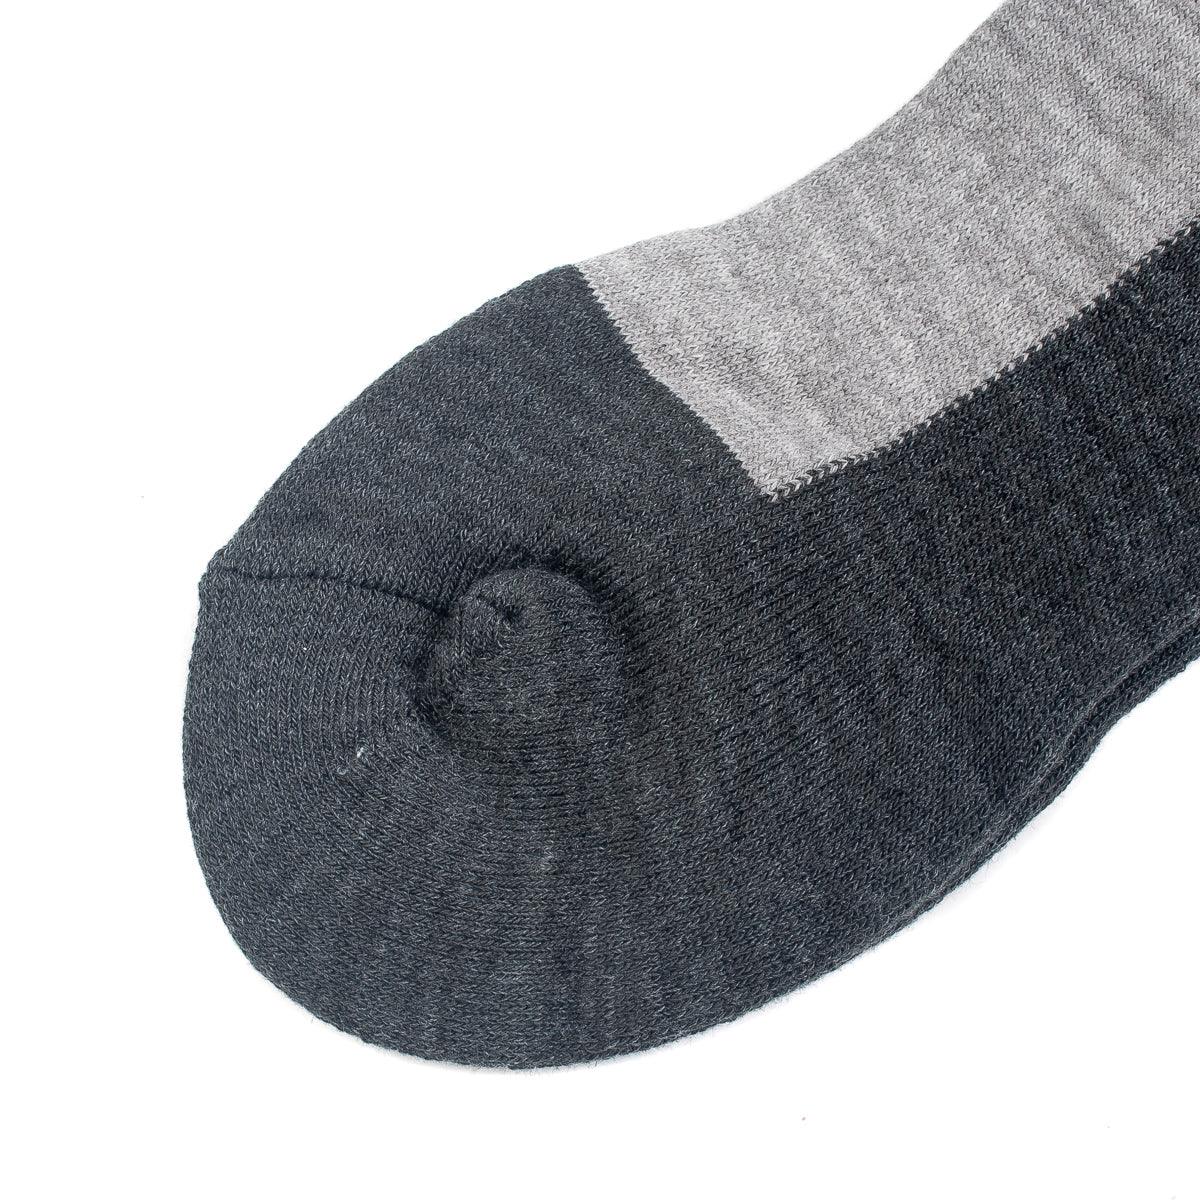 Image showing the IHG-030-GRYCHA - Iron Heart Work Boot Socks - Grey/Charcoal which is a Socks described by the following info Accessories, IHSALE_M23, Iron Heart, Released, Socks and sold on the IRON HEART GERMANY online store